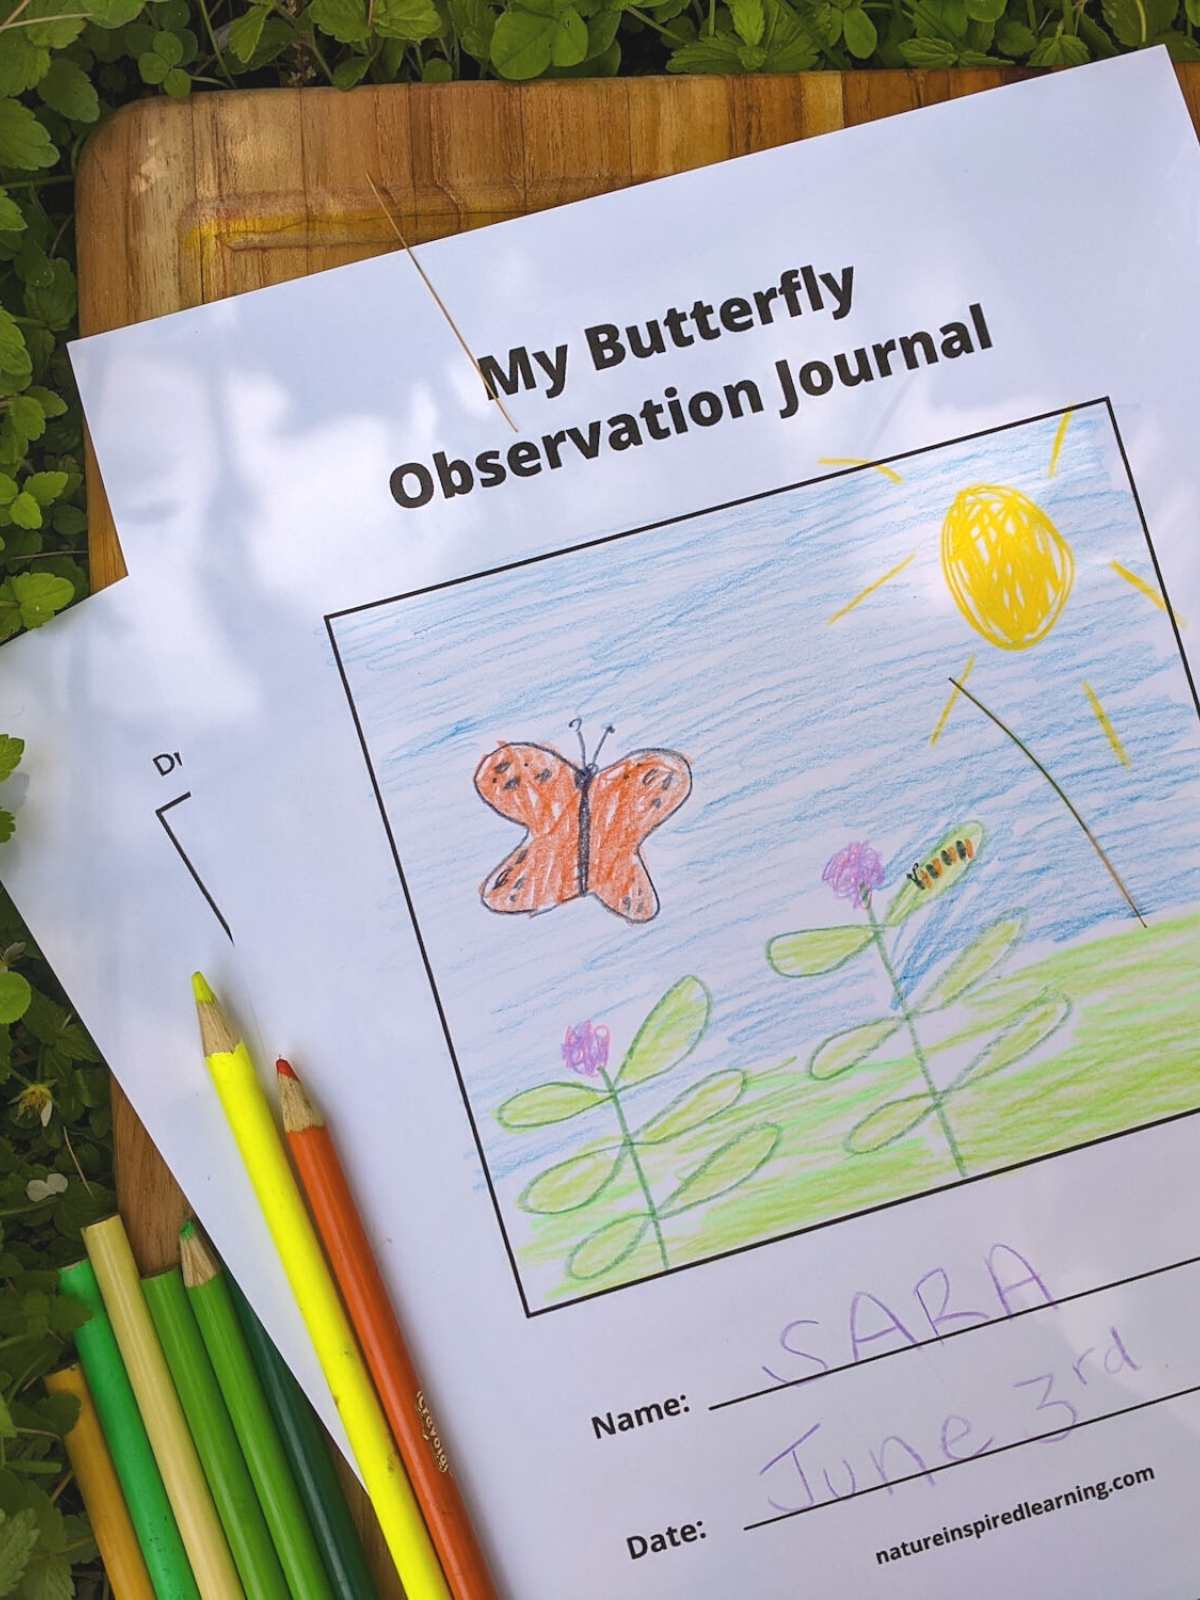 printed off my butterfly observation journal pages outside on a wooden cutting board on green plants colored pencils bottom left. Hand drawn butterfly and caterpillar sketch on the cover